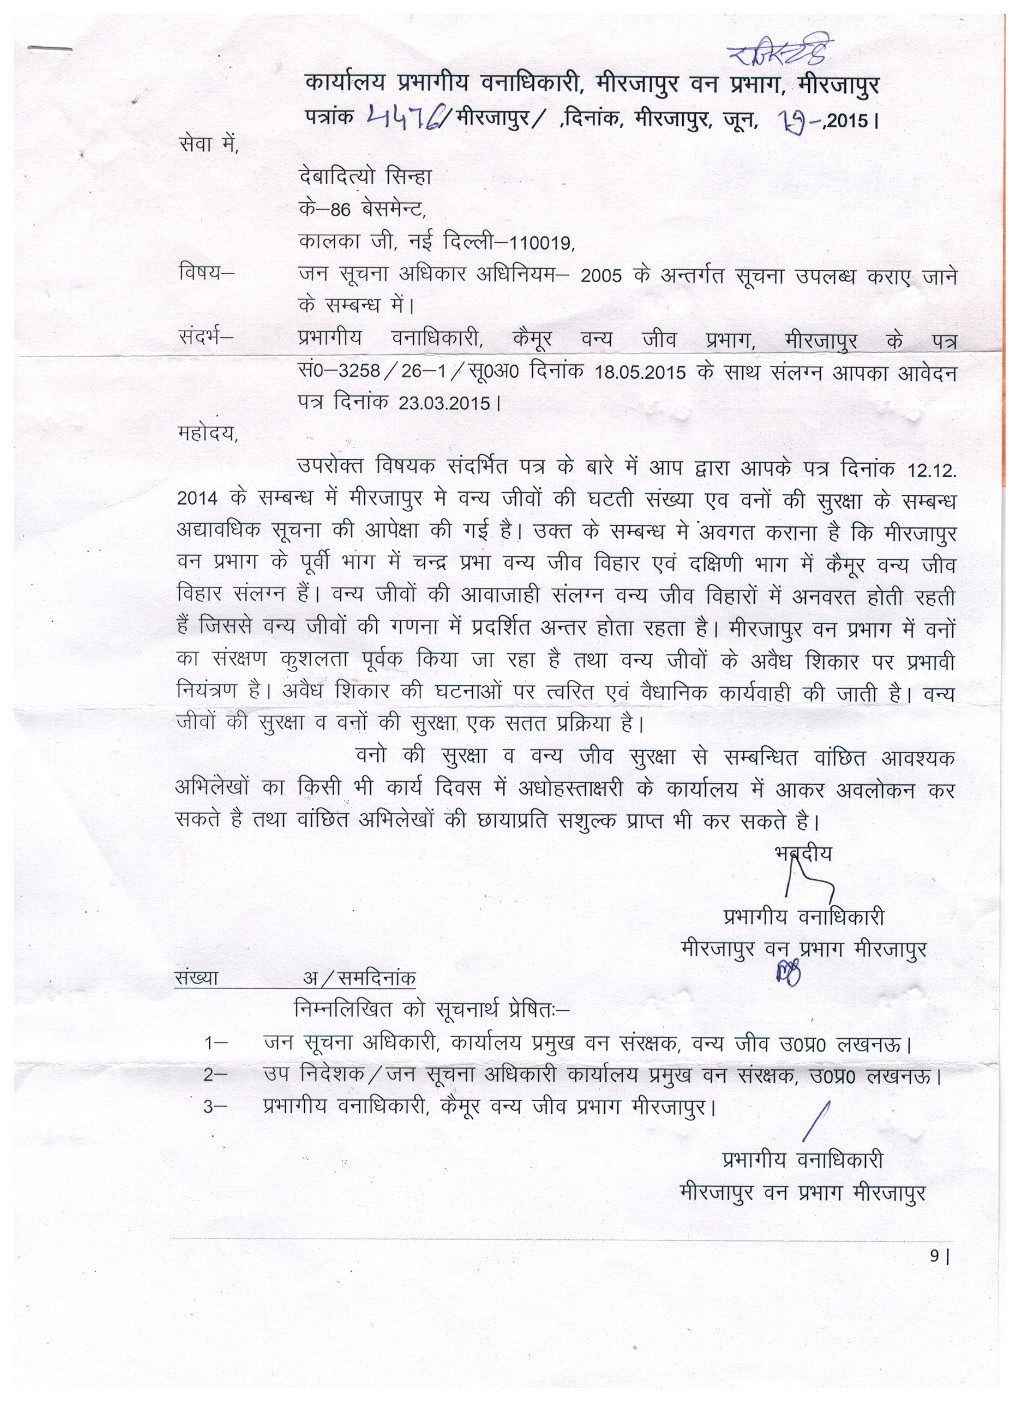 Scan-Reply-of-DFO-Mirzapur